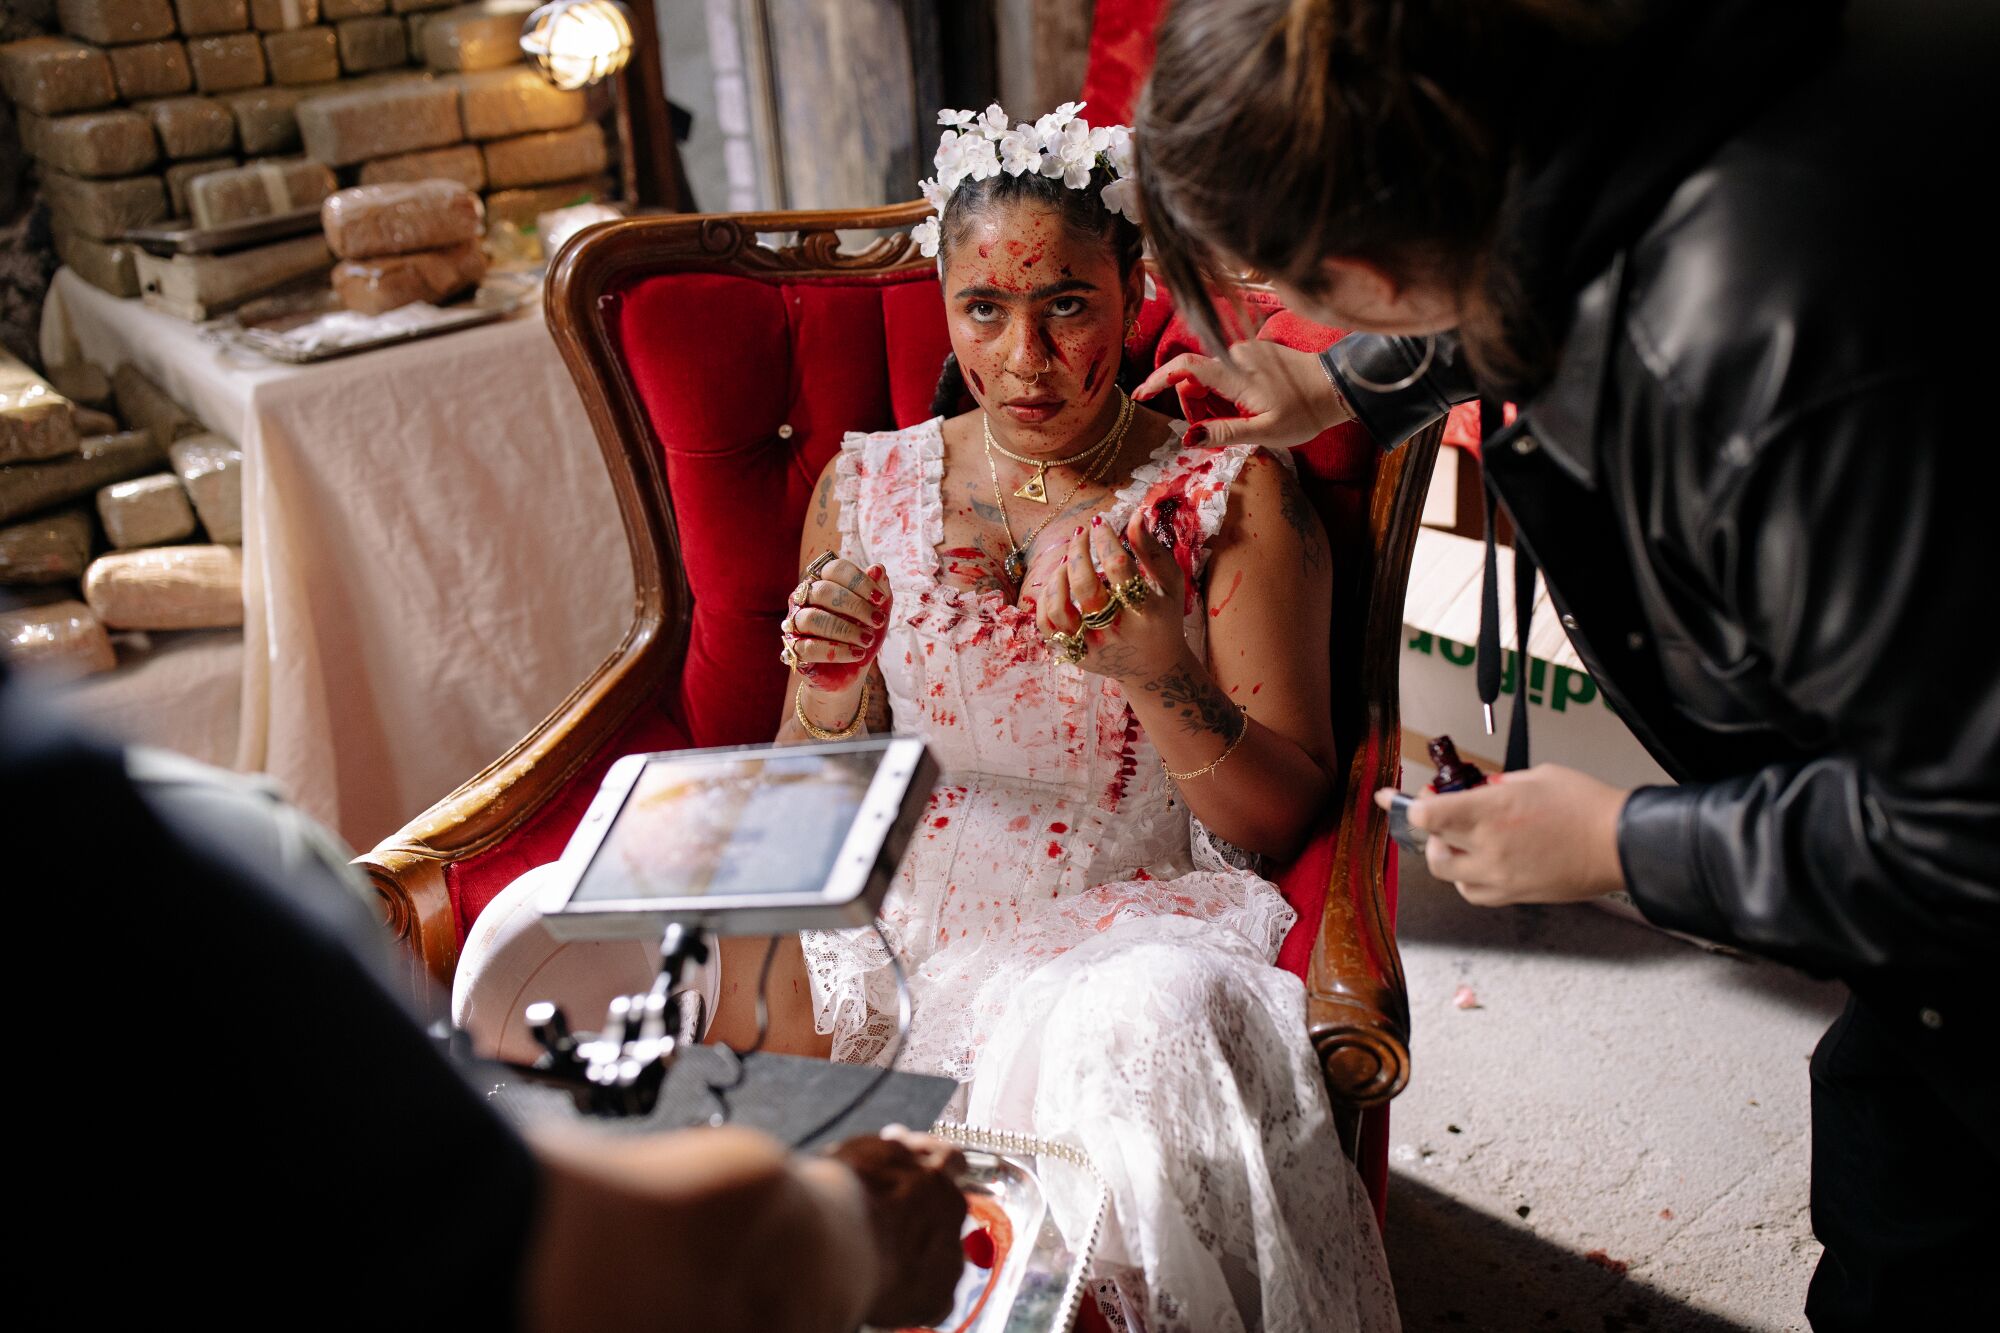 Tokischa's team prepares for a scene in her upcoming music video.